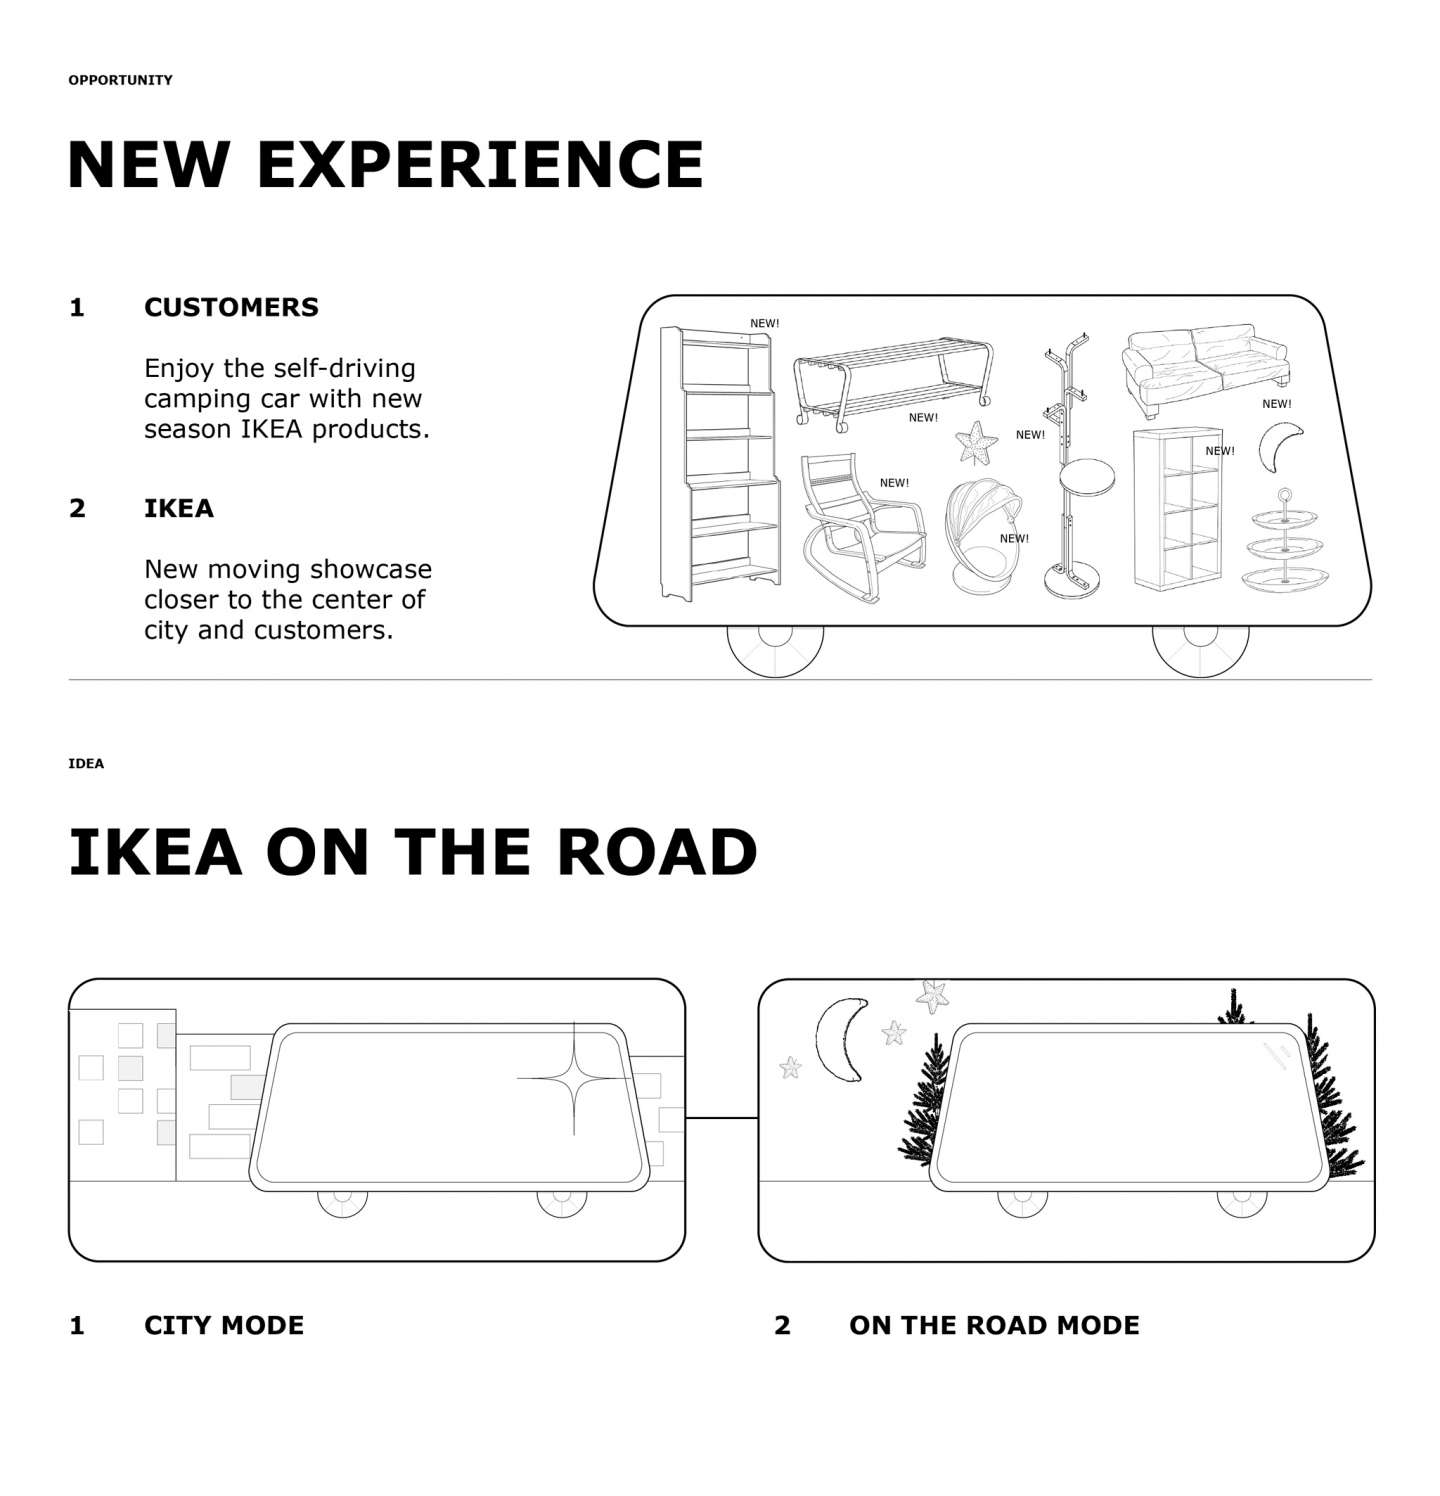 IKEA On the Road